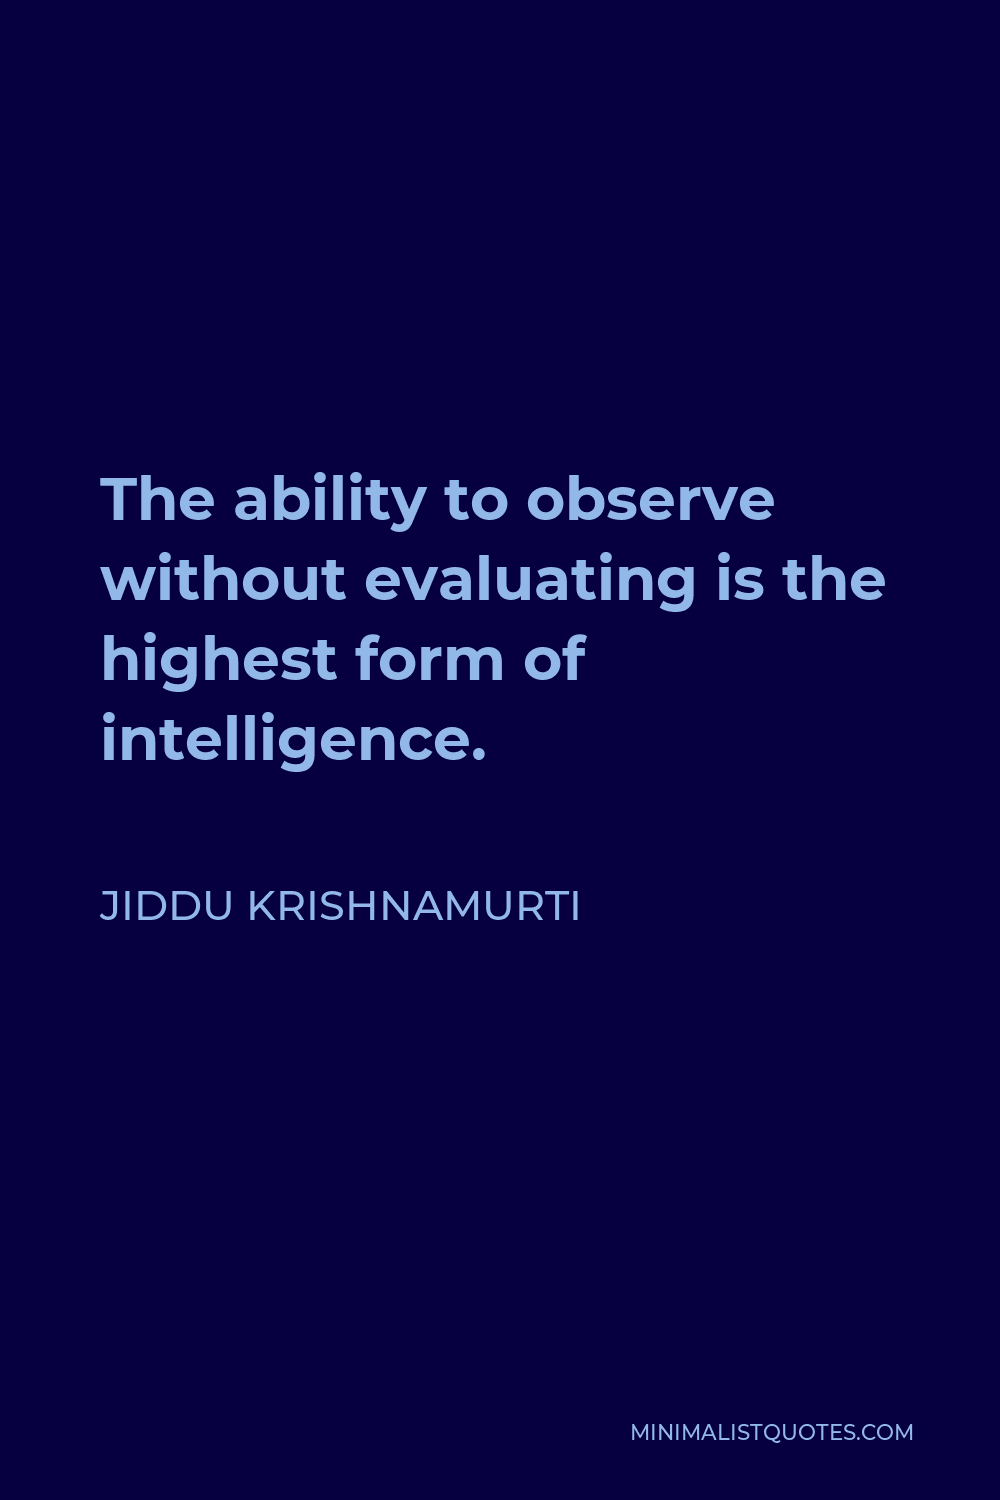 Jiddu Krishnamurti Quote - The ability to observe without evaluating is the highest form of intelligence.